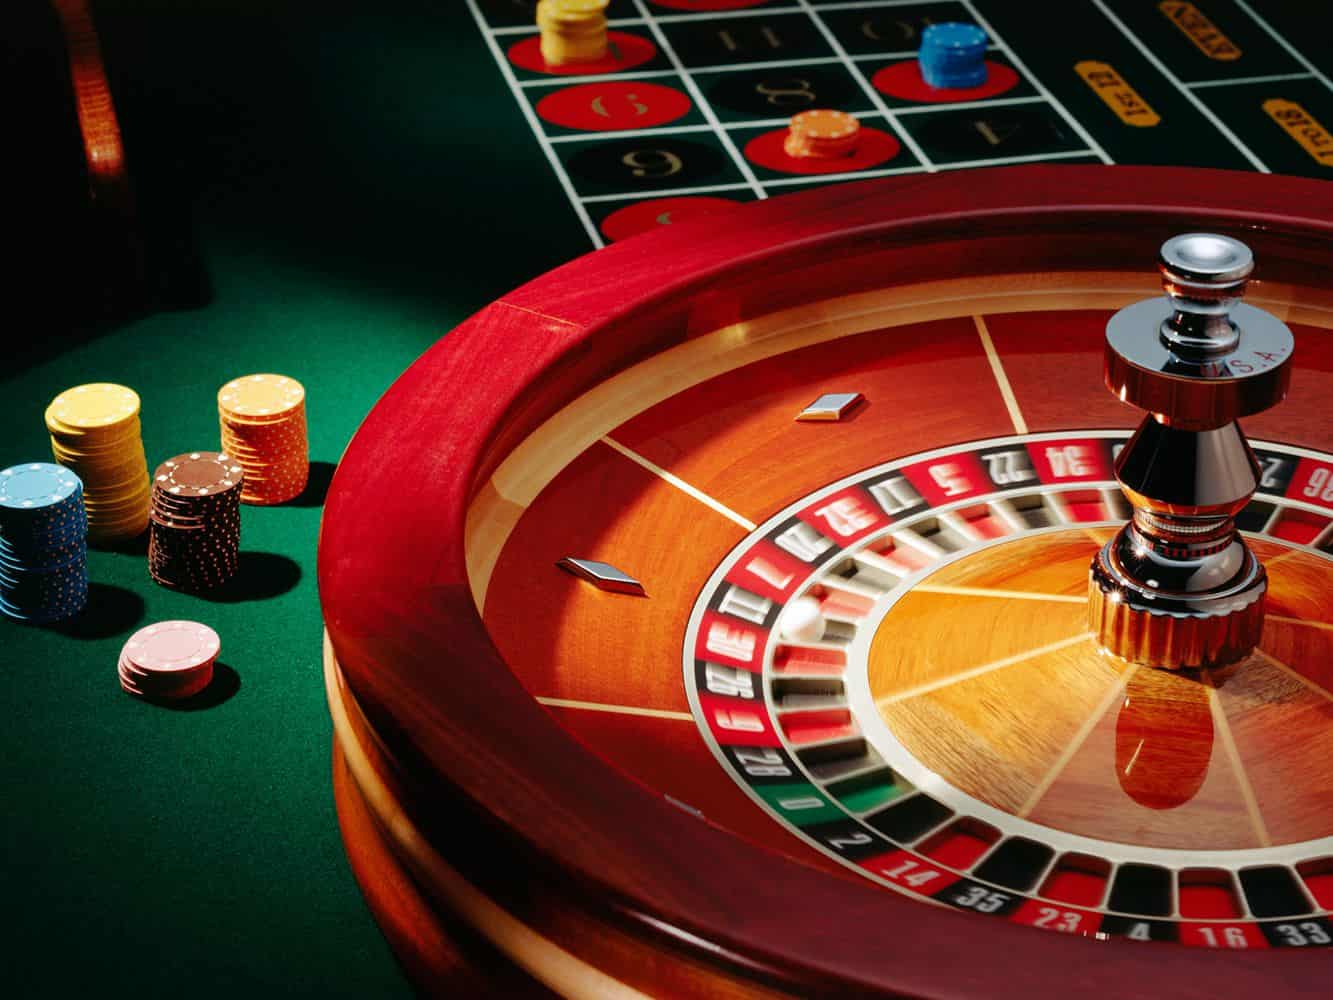 2 – Playing Roulette Encourages Socialization